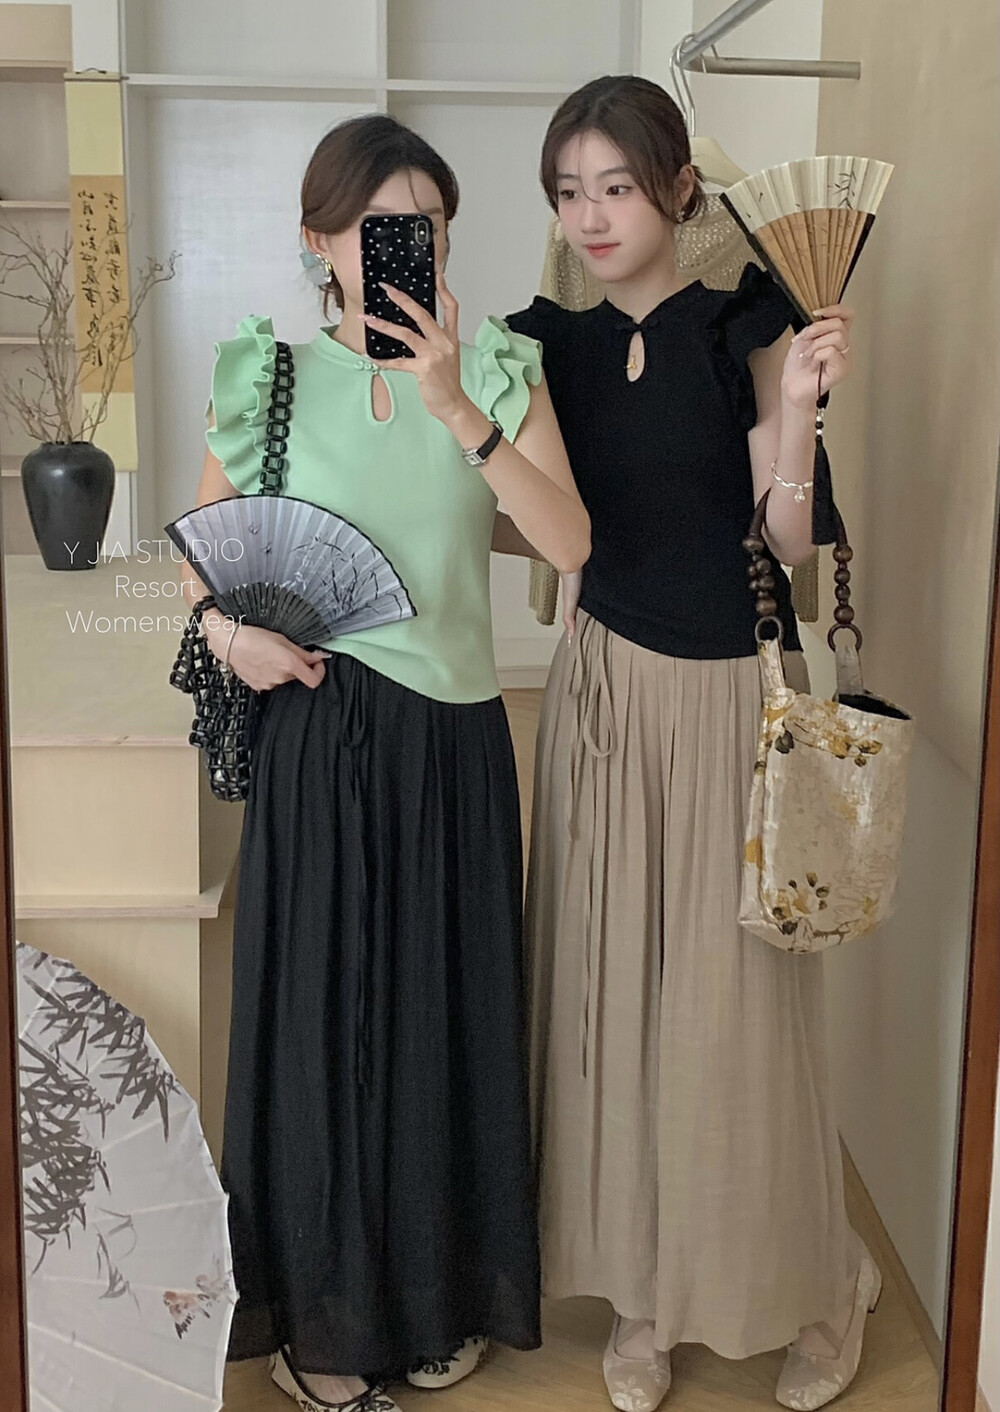 Recommended for Yo-yo Home’s own collection~ New Chinese style design with buckles and flying sleeves short-sleeved sweaters for women